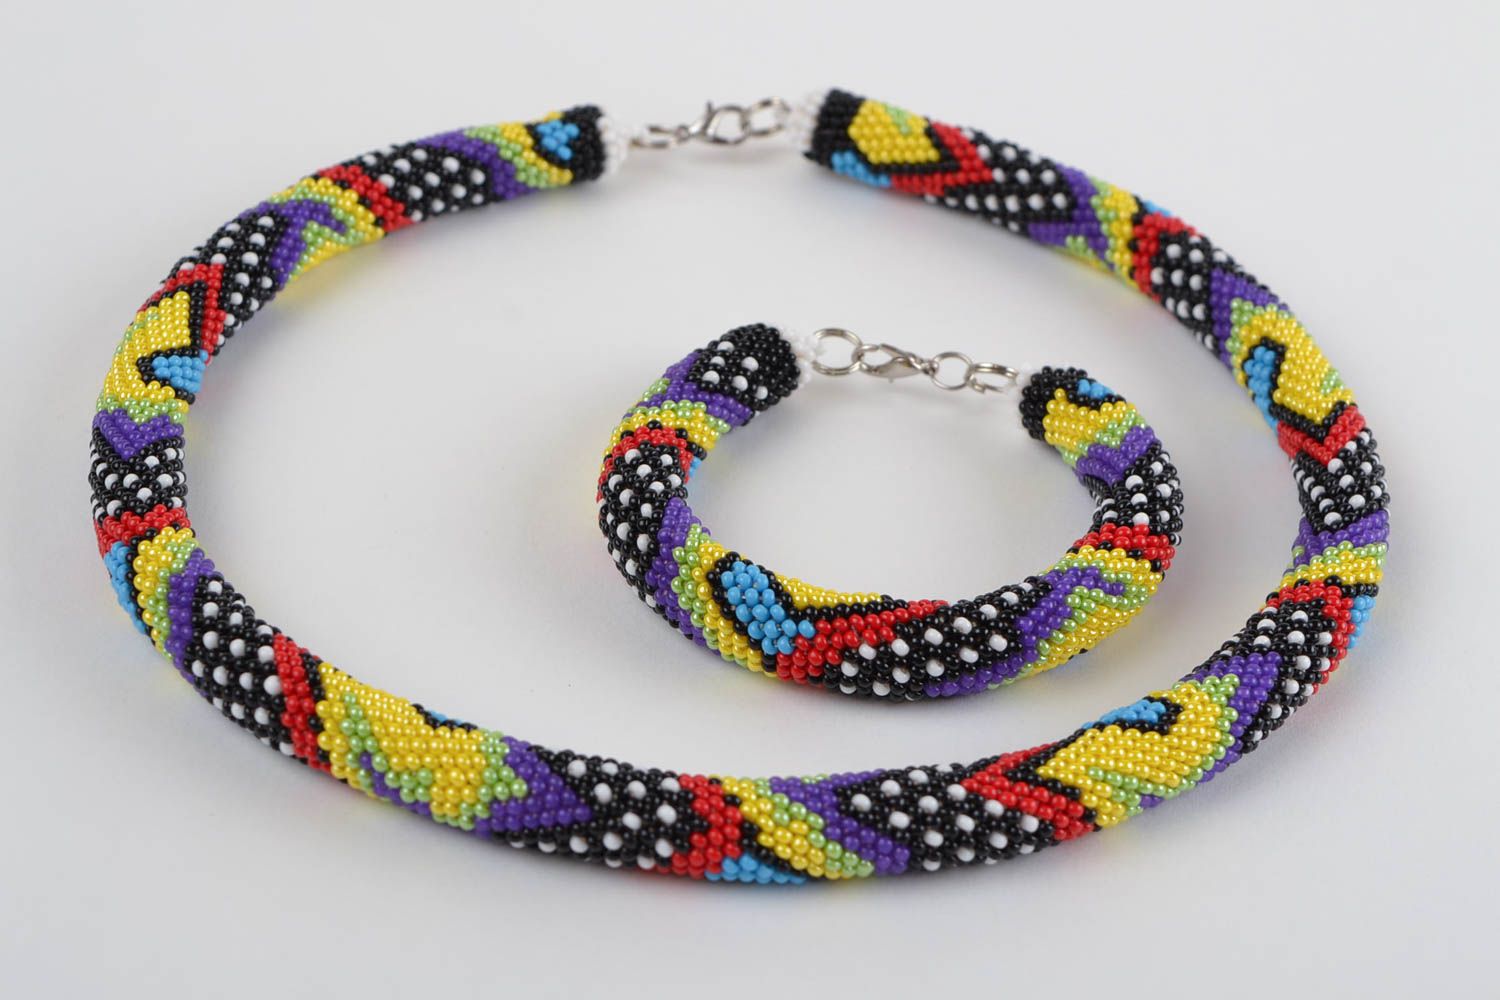 Handmade bead wide cord necklace and bracelet in African style for women photo 2